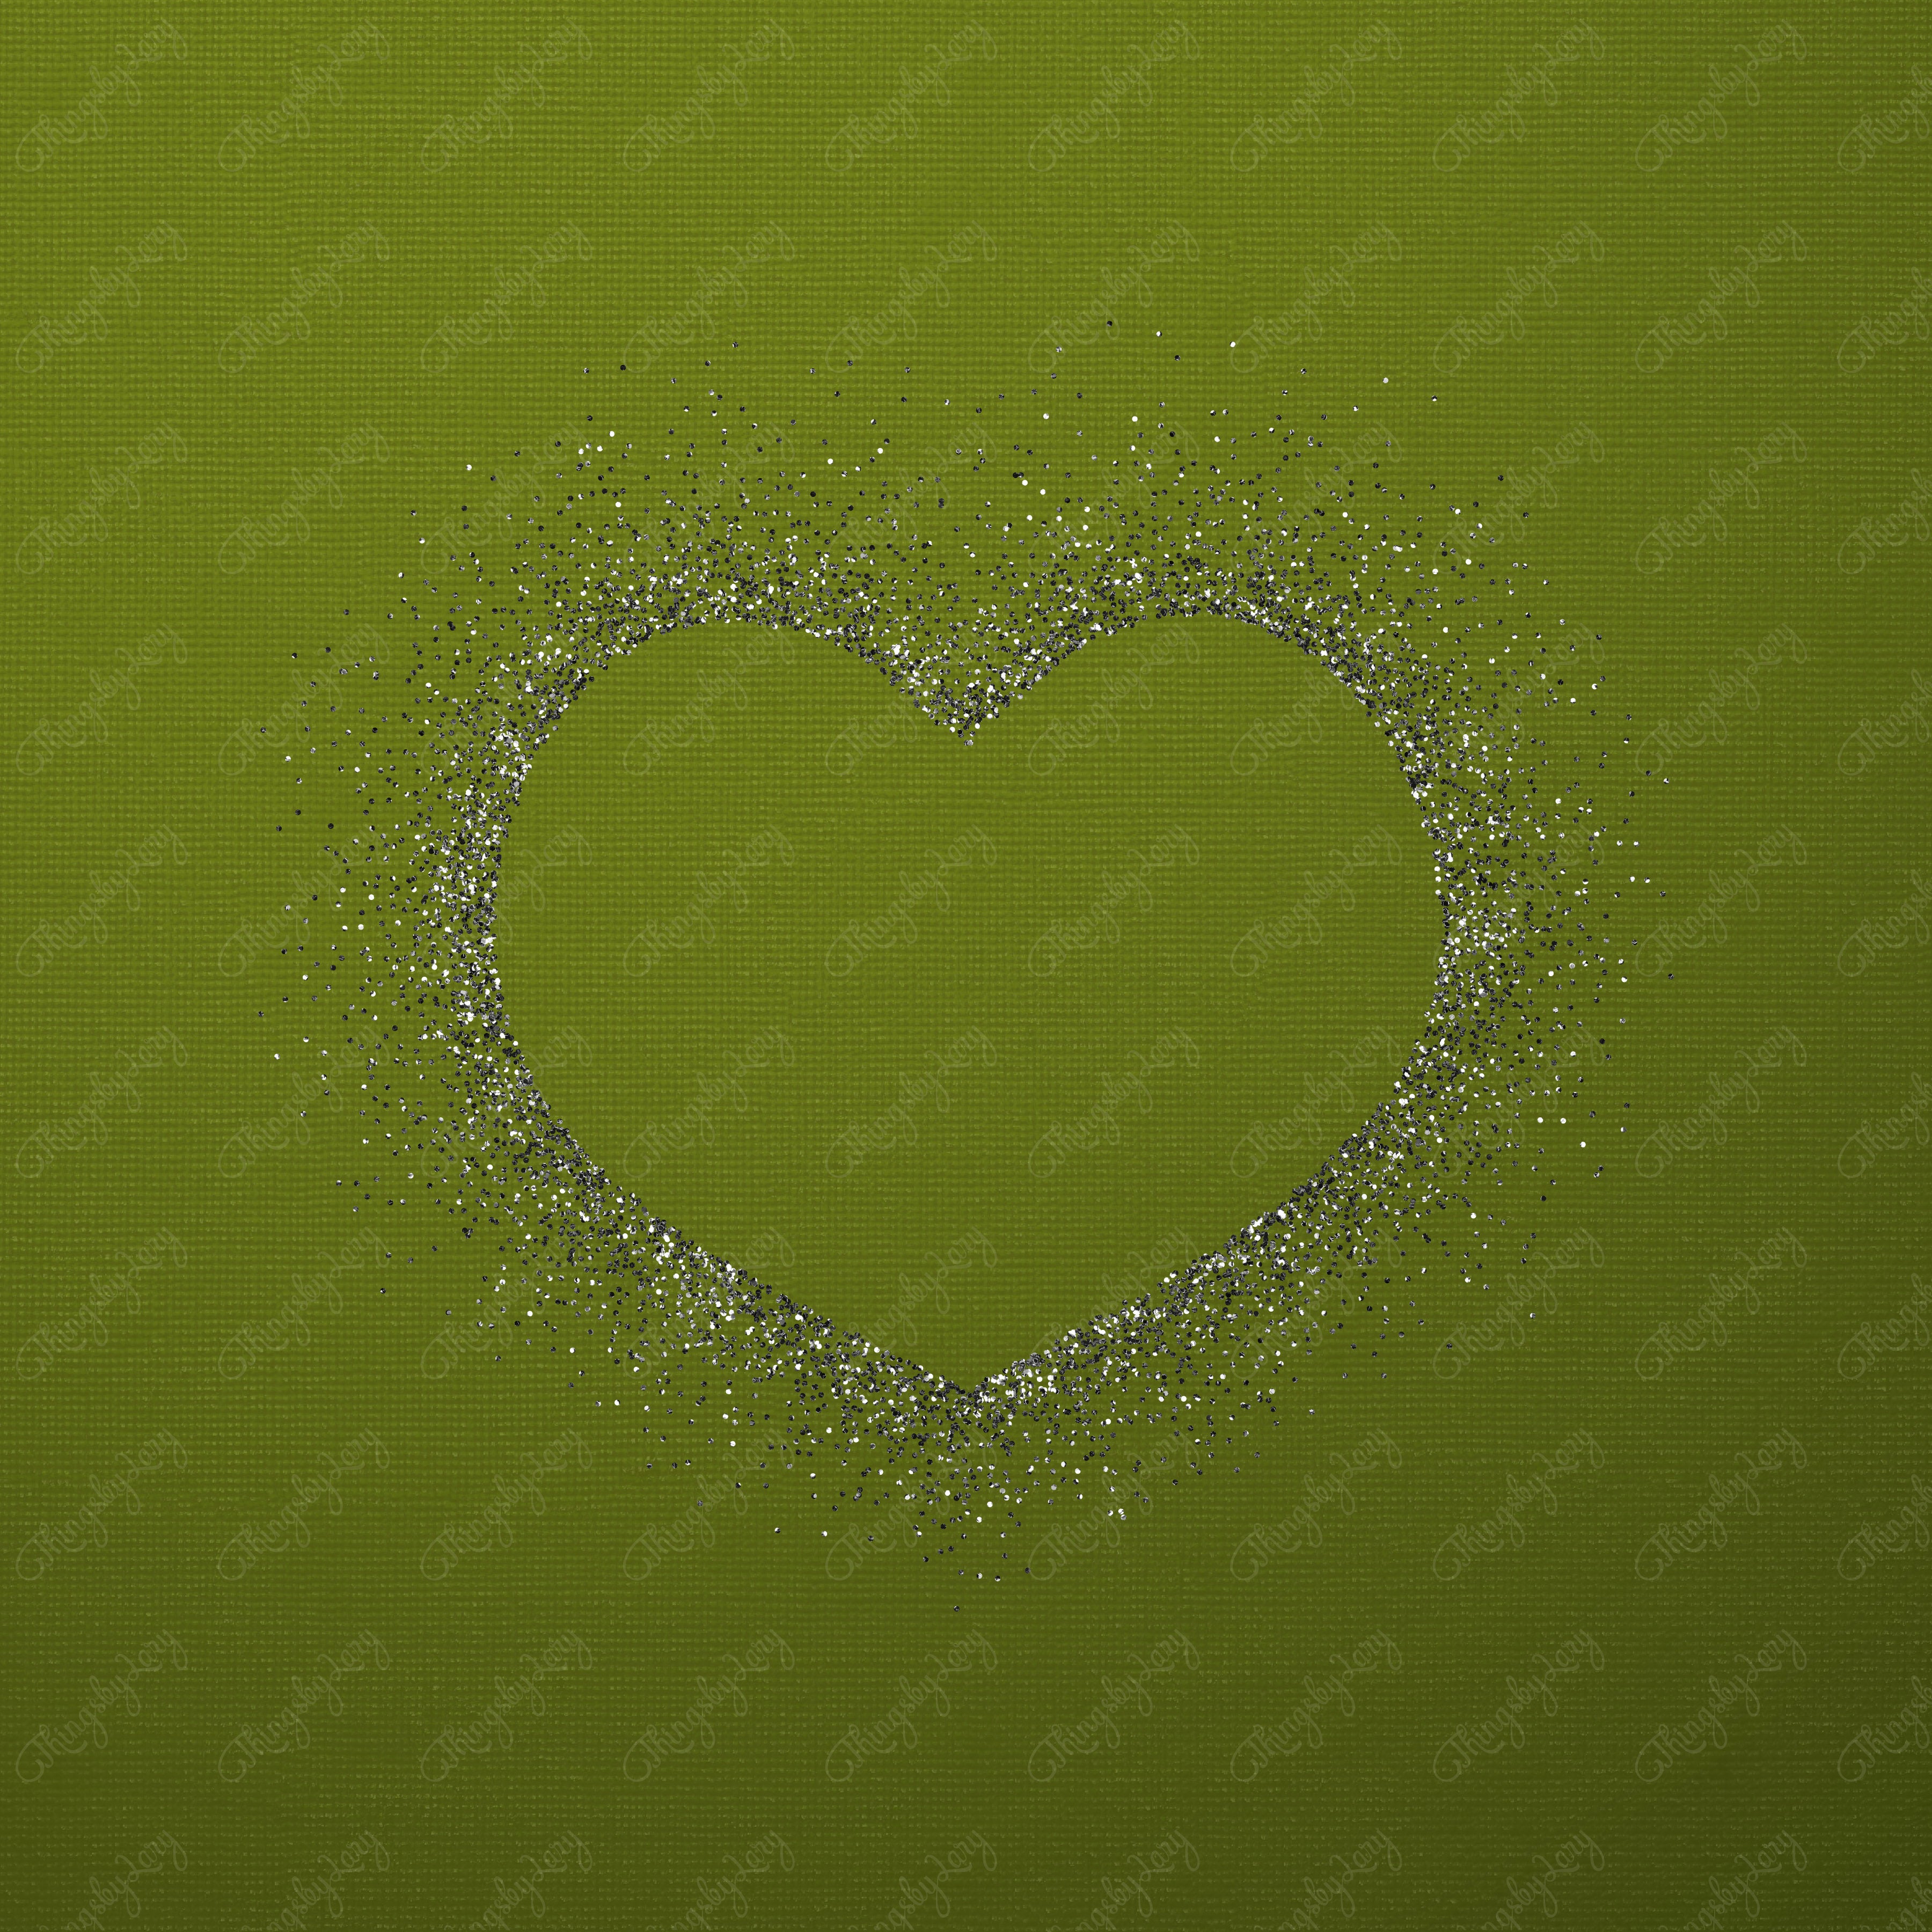 100 Glitter Particle Heart Frames PNG